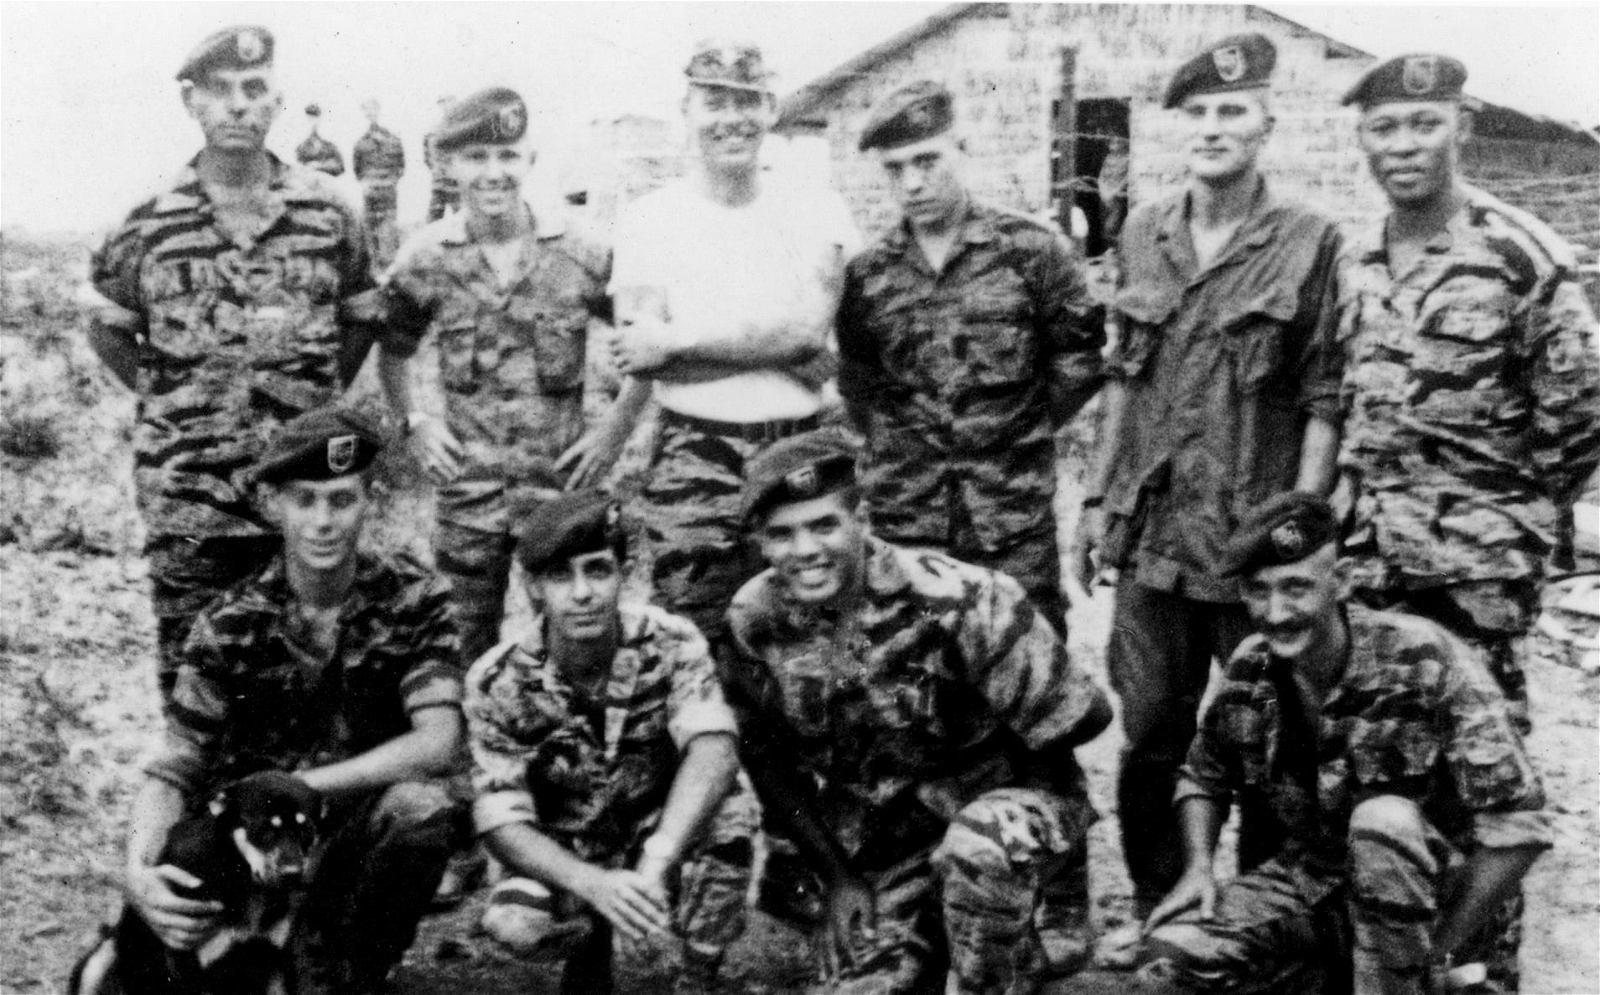 Special Forces Wear “Tiger Stripe” Camouflage From The 1960's